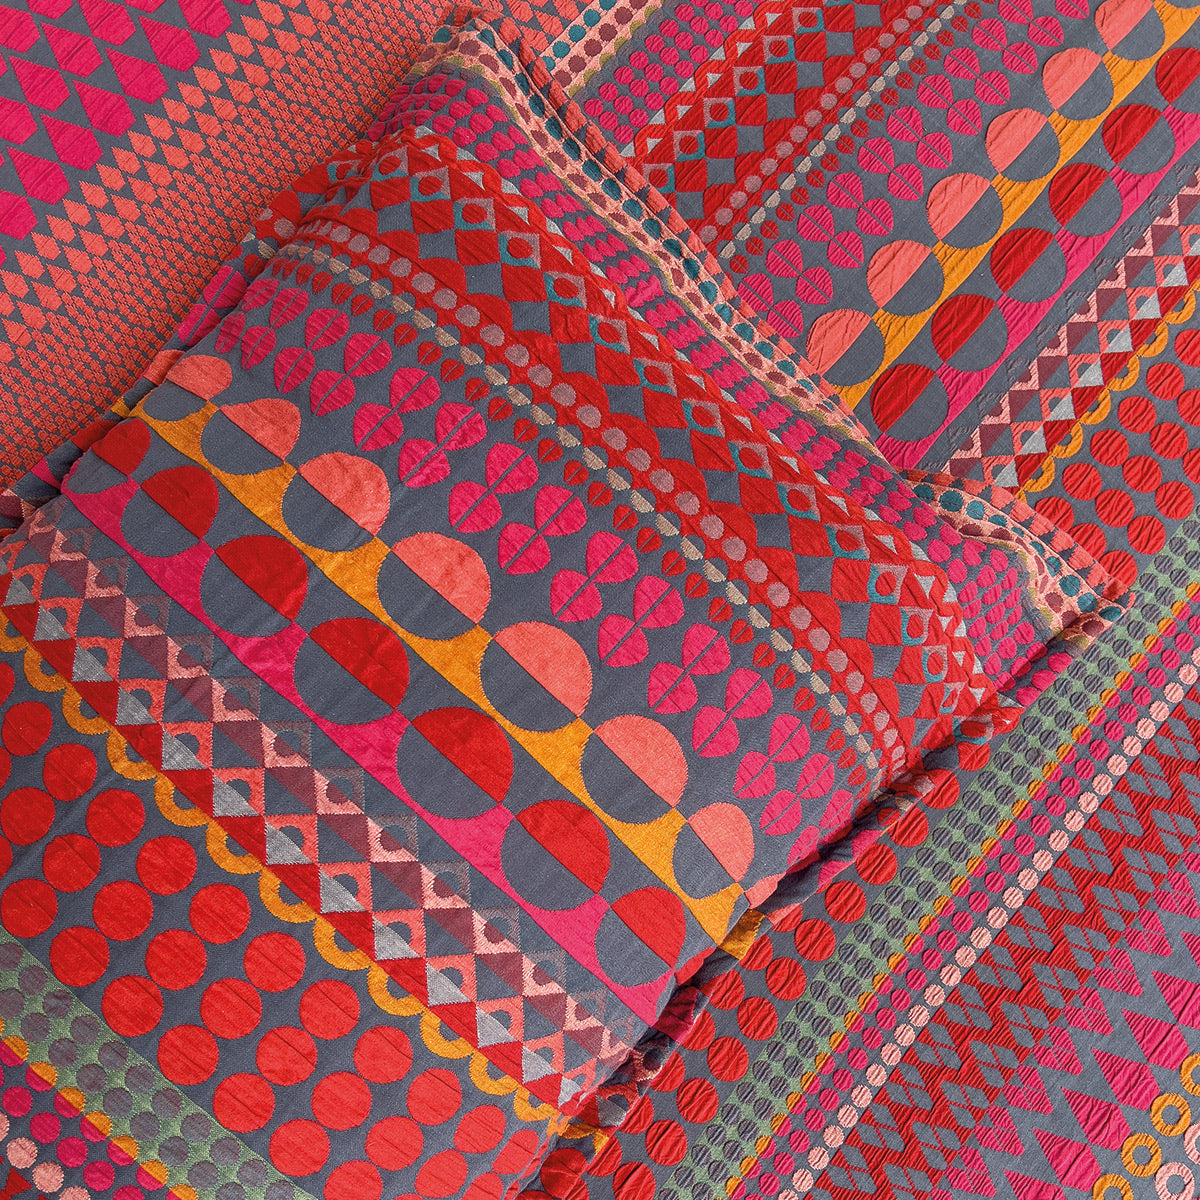 geometric bed linen, colourful bed linen, designer bed linen, luxury bed linen, quality bedlinen, red bedlinen, cotton bedlinen, pink bedlinen